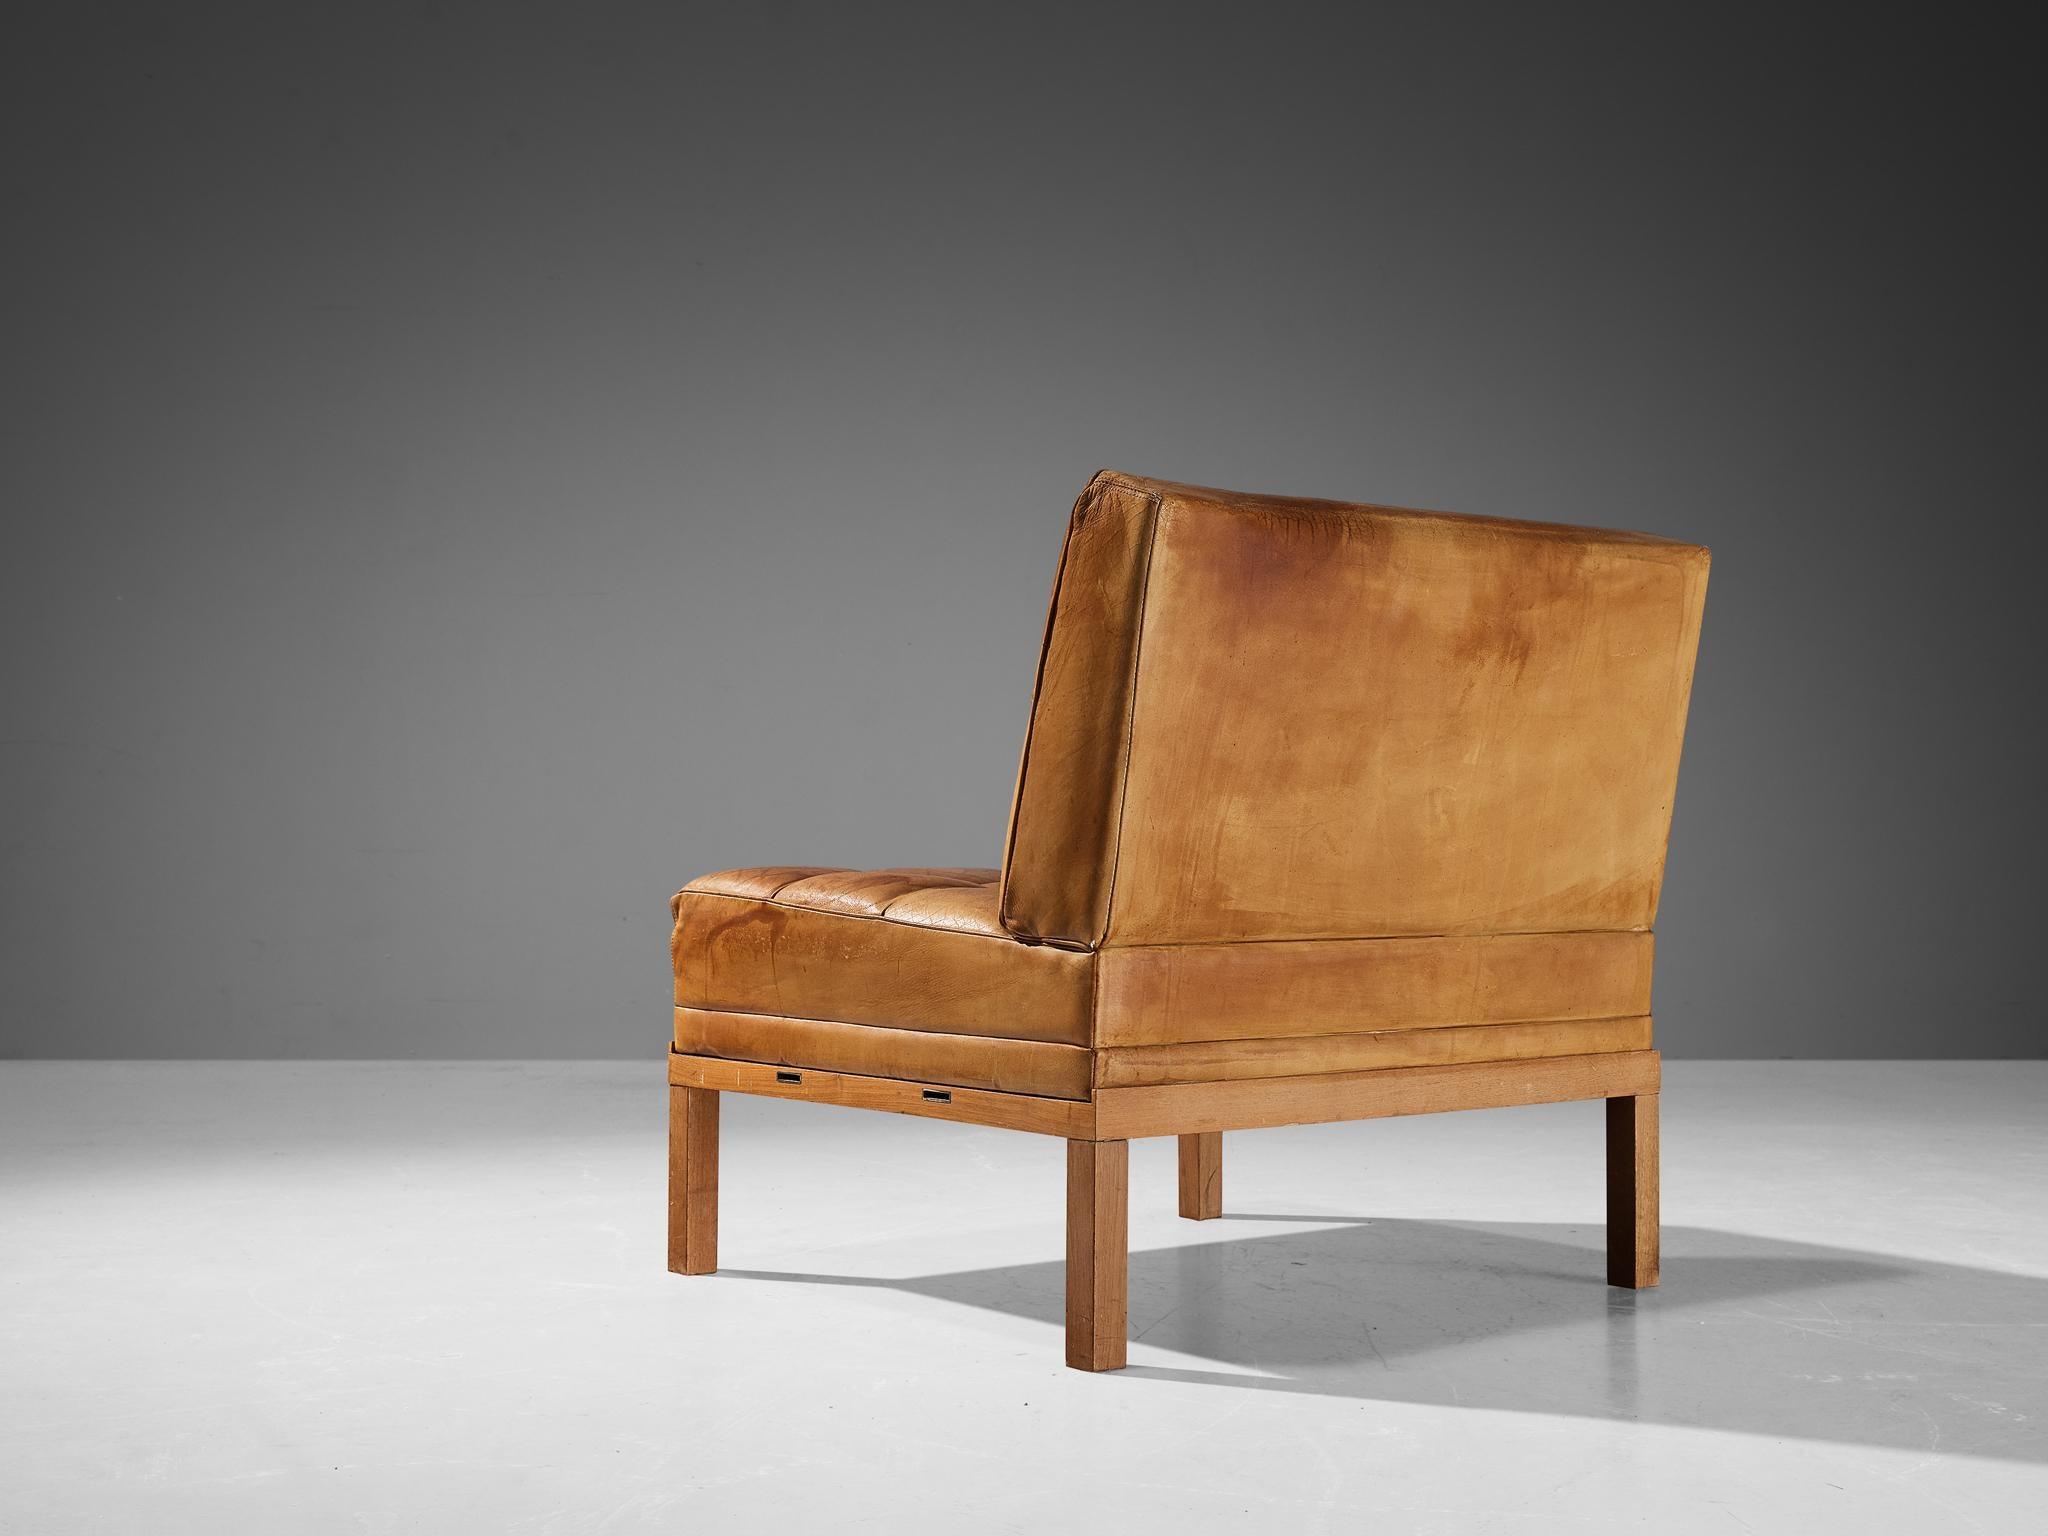 Mid-20th Century Johannes Spalt for Wittmann Pair of Lounge Chairs in Cognac Leather